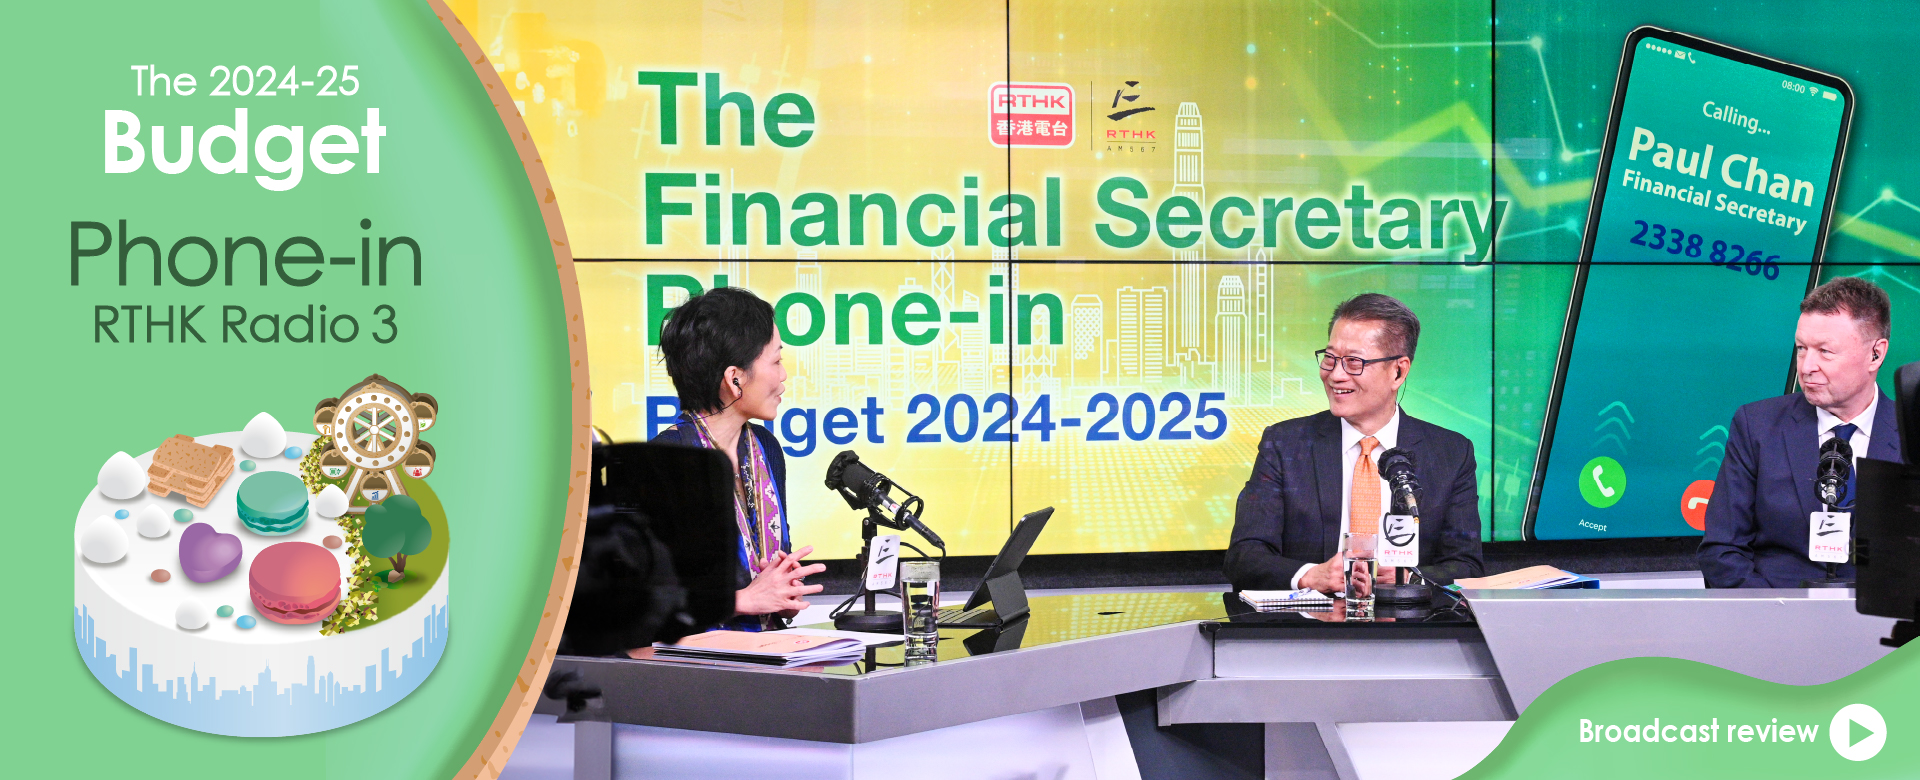 The 2024-25 The Financial Secretary's Budget Phone-in review